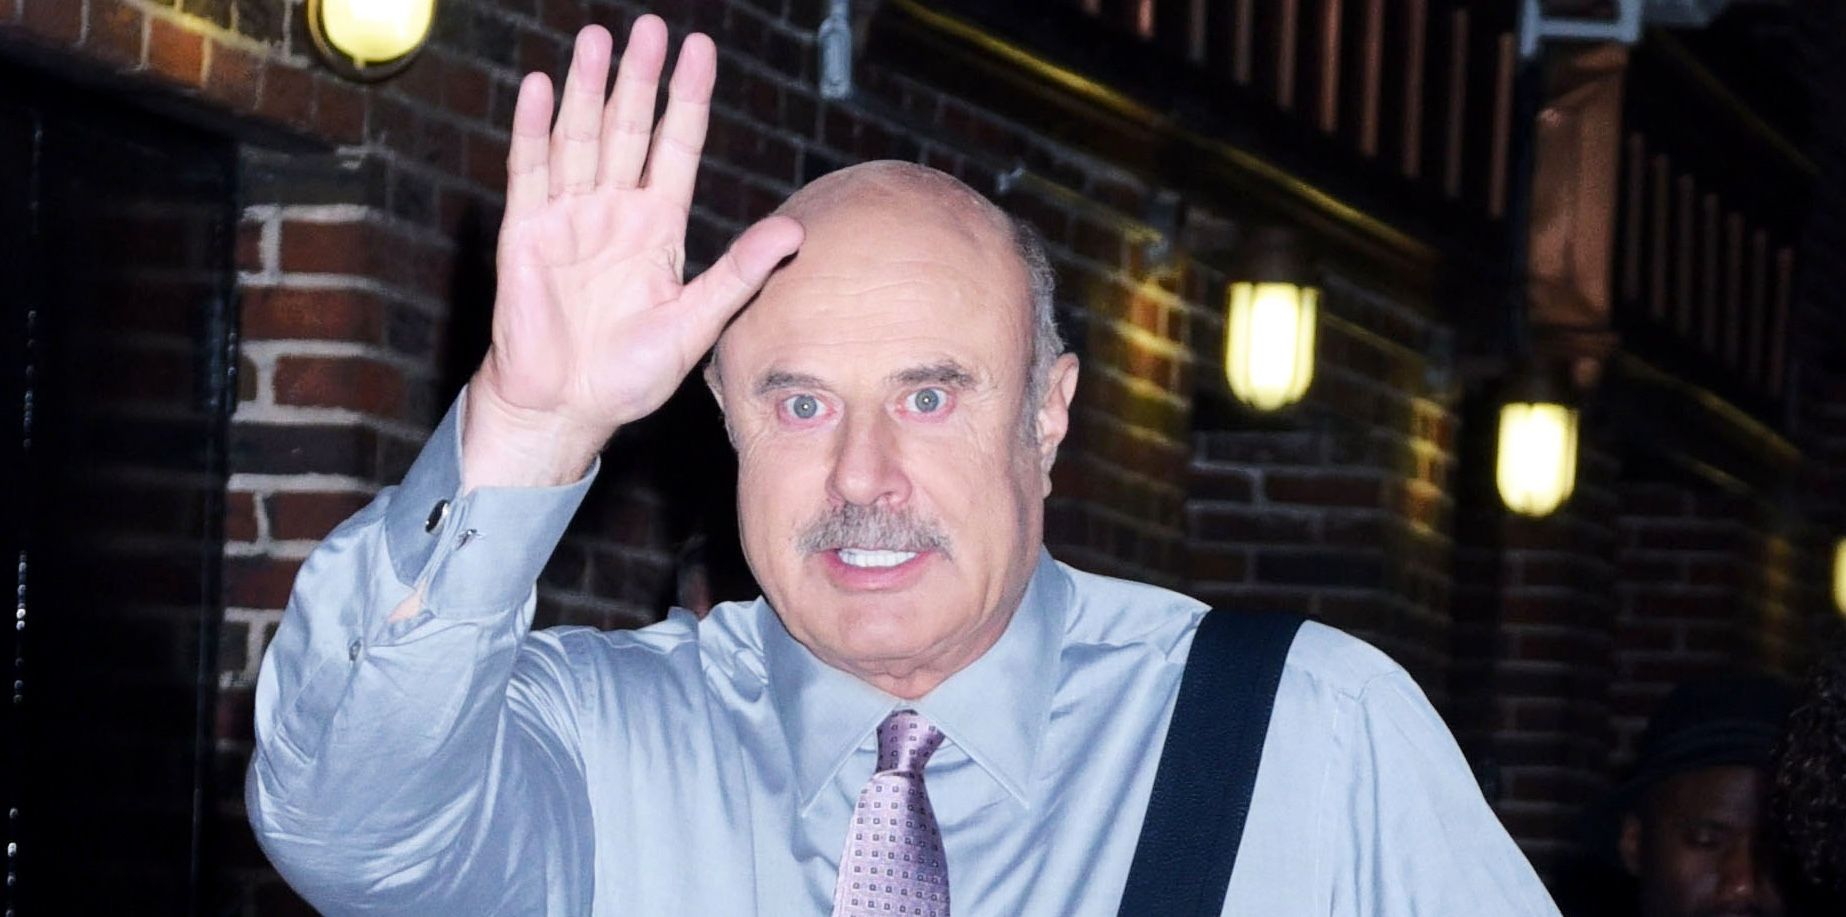 Dr. Phil Has Been Accused Of Running A Toxic Workplace